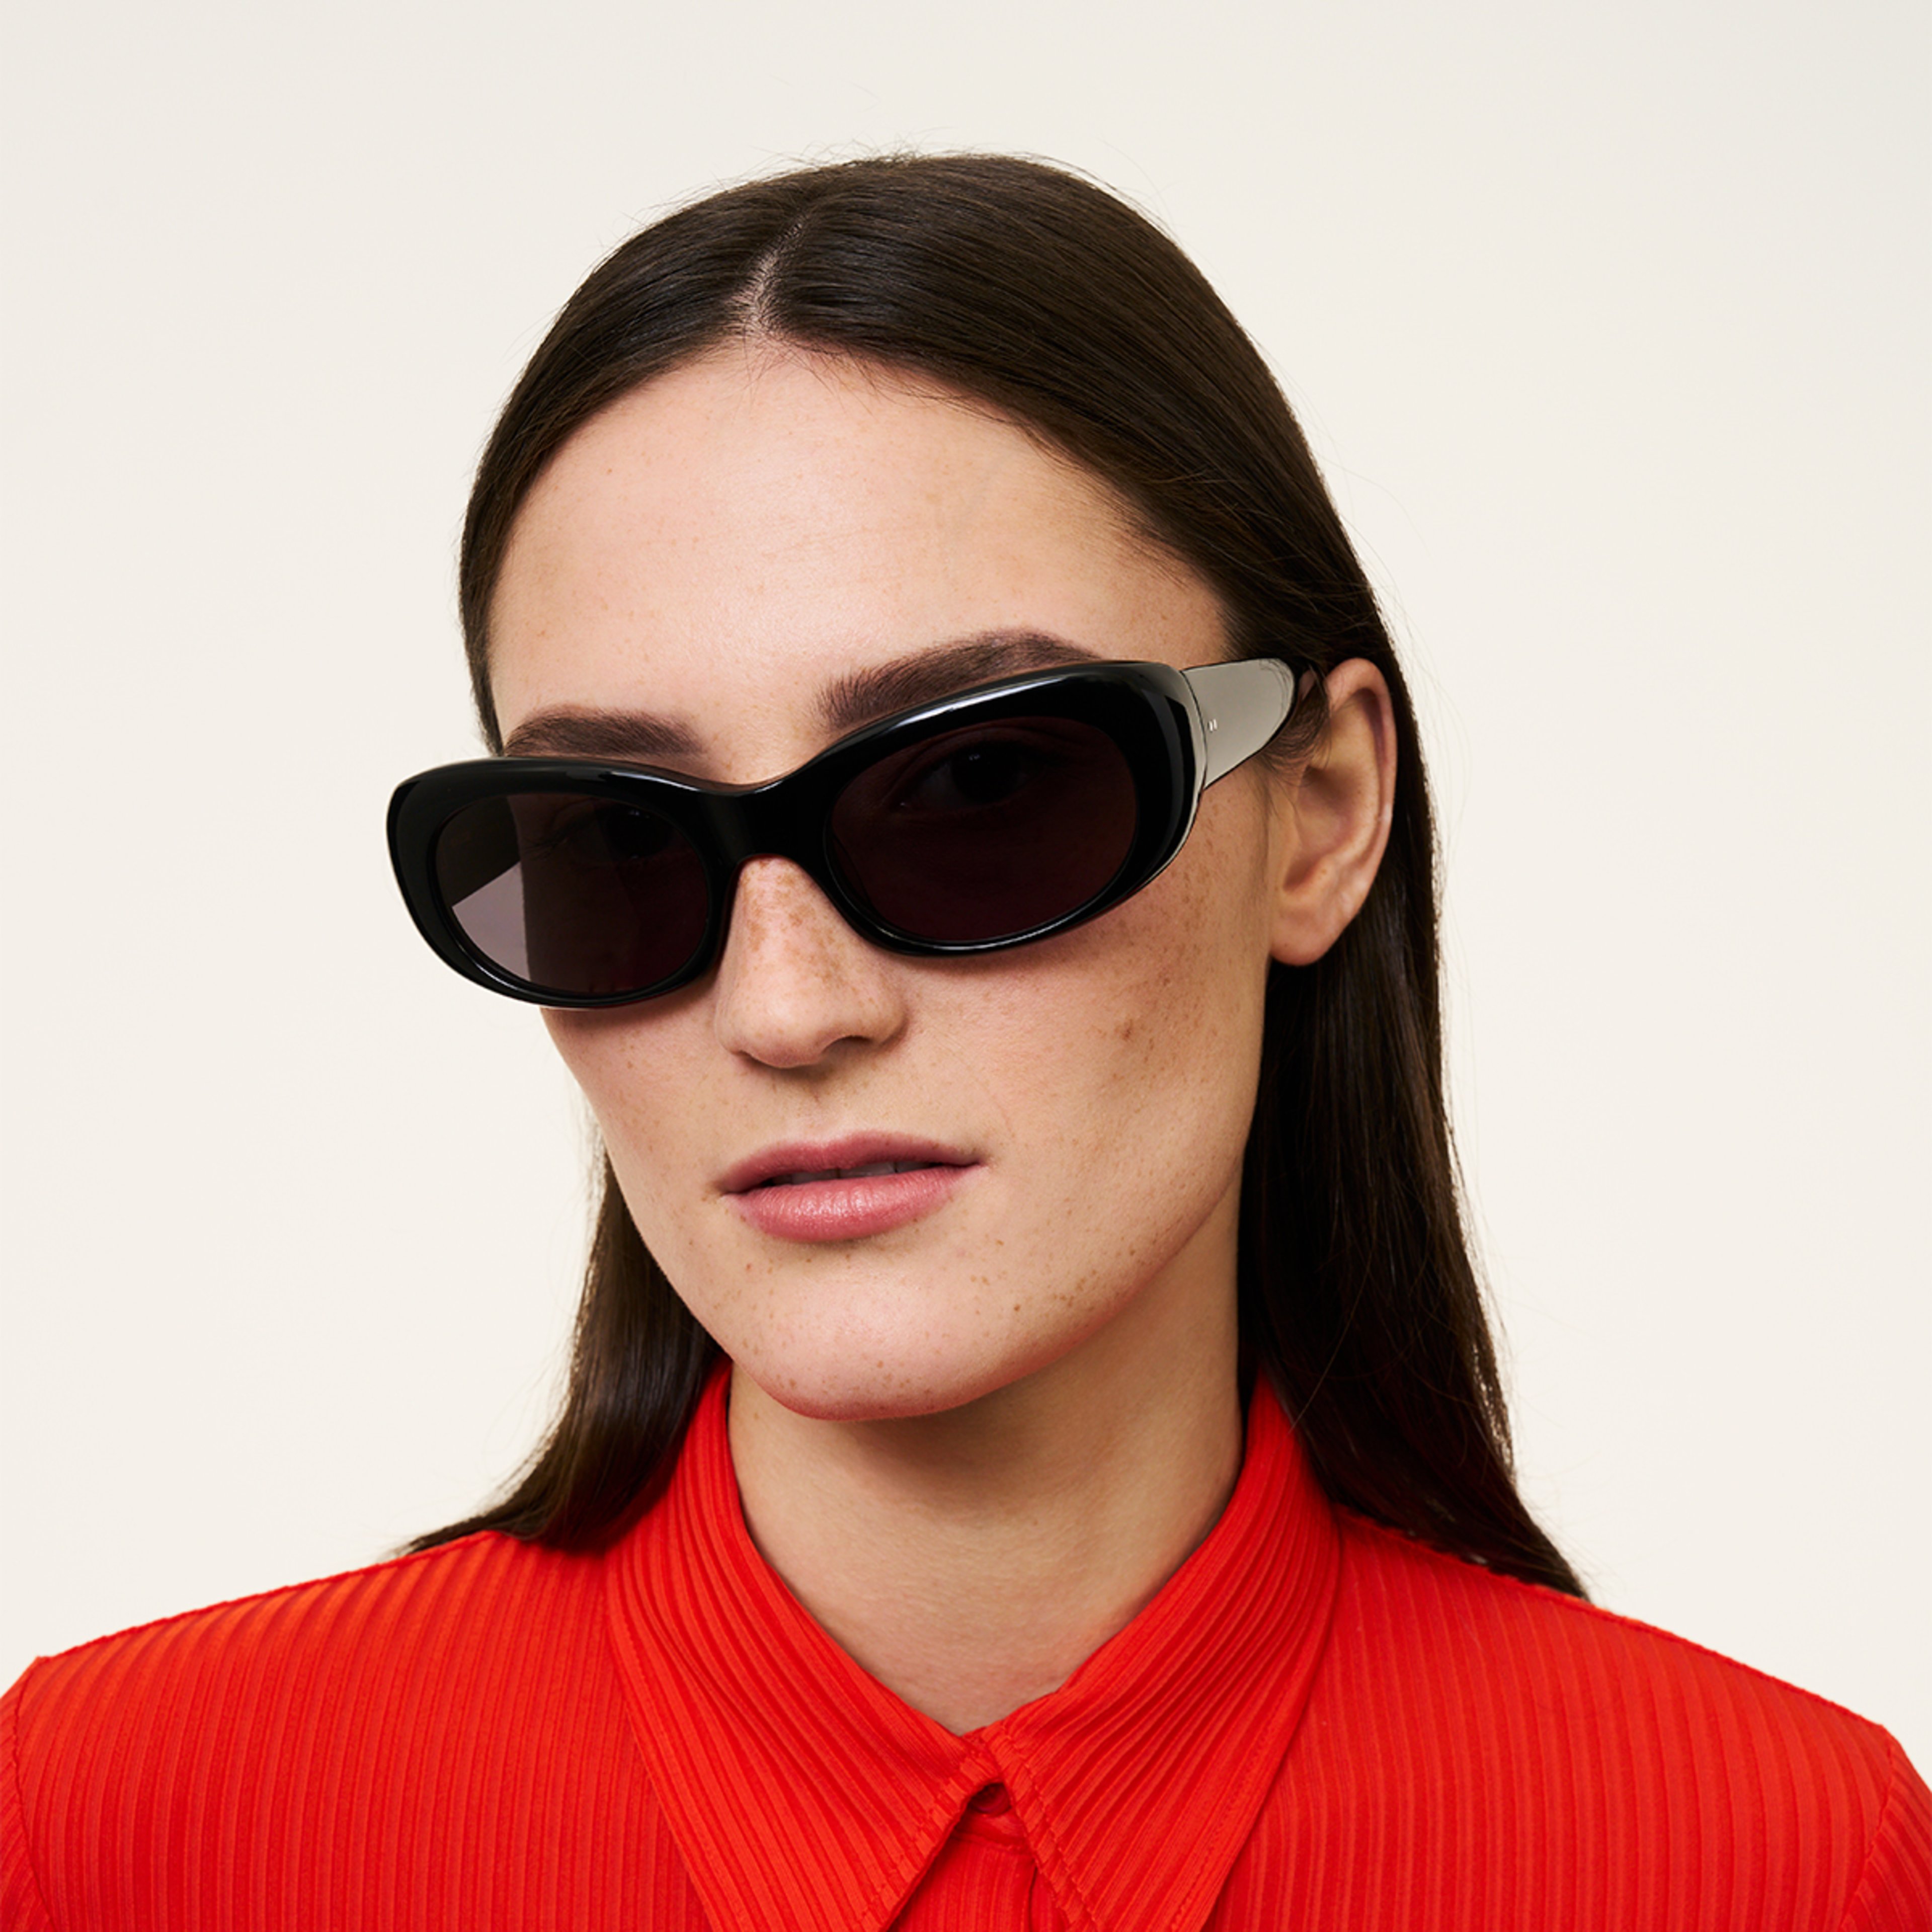 Ace & Tate Solaires | oval recyclé in Noir